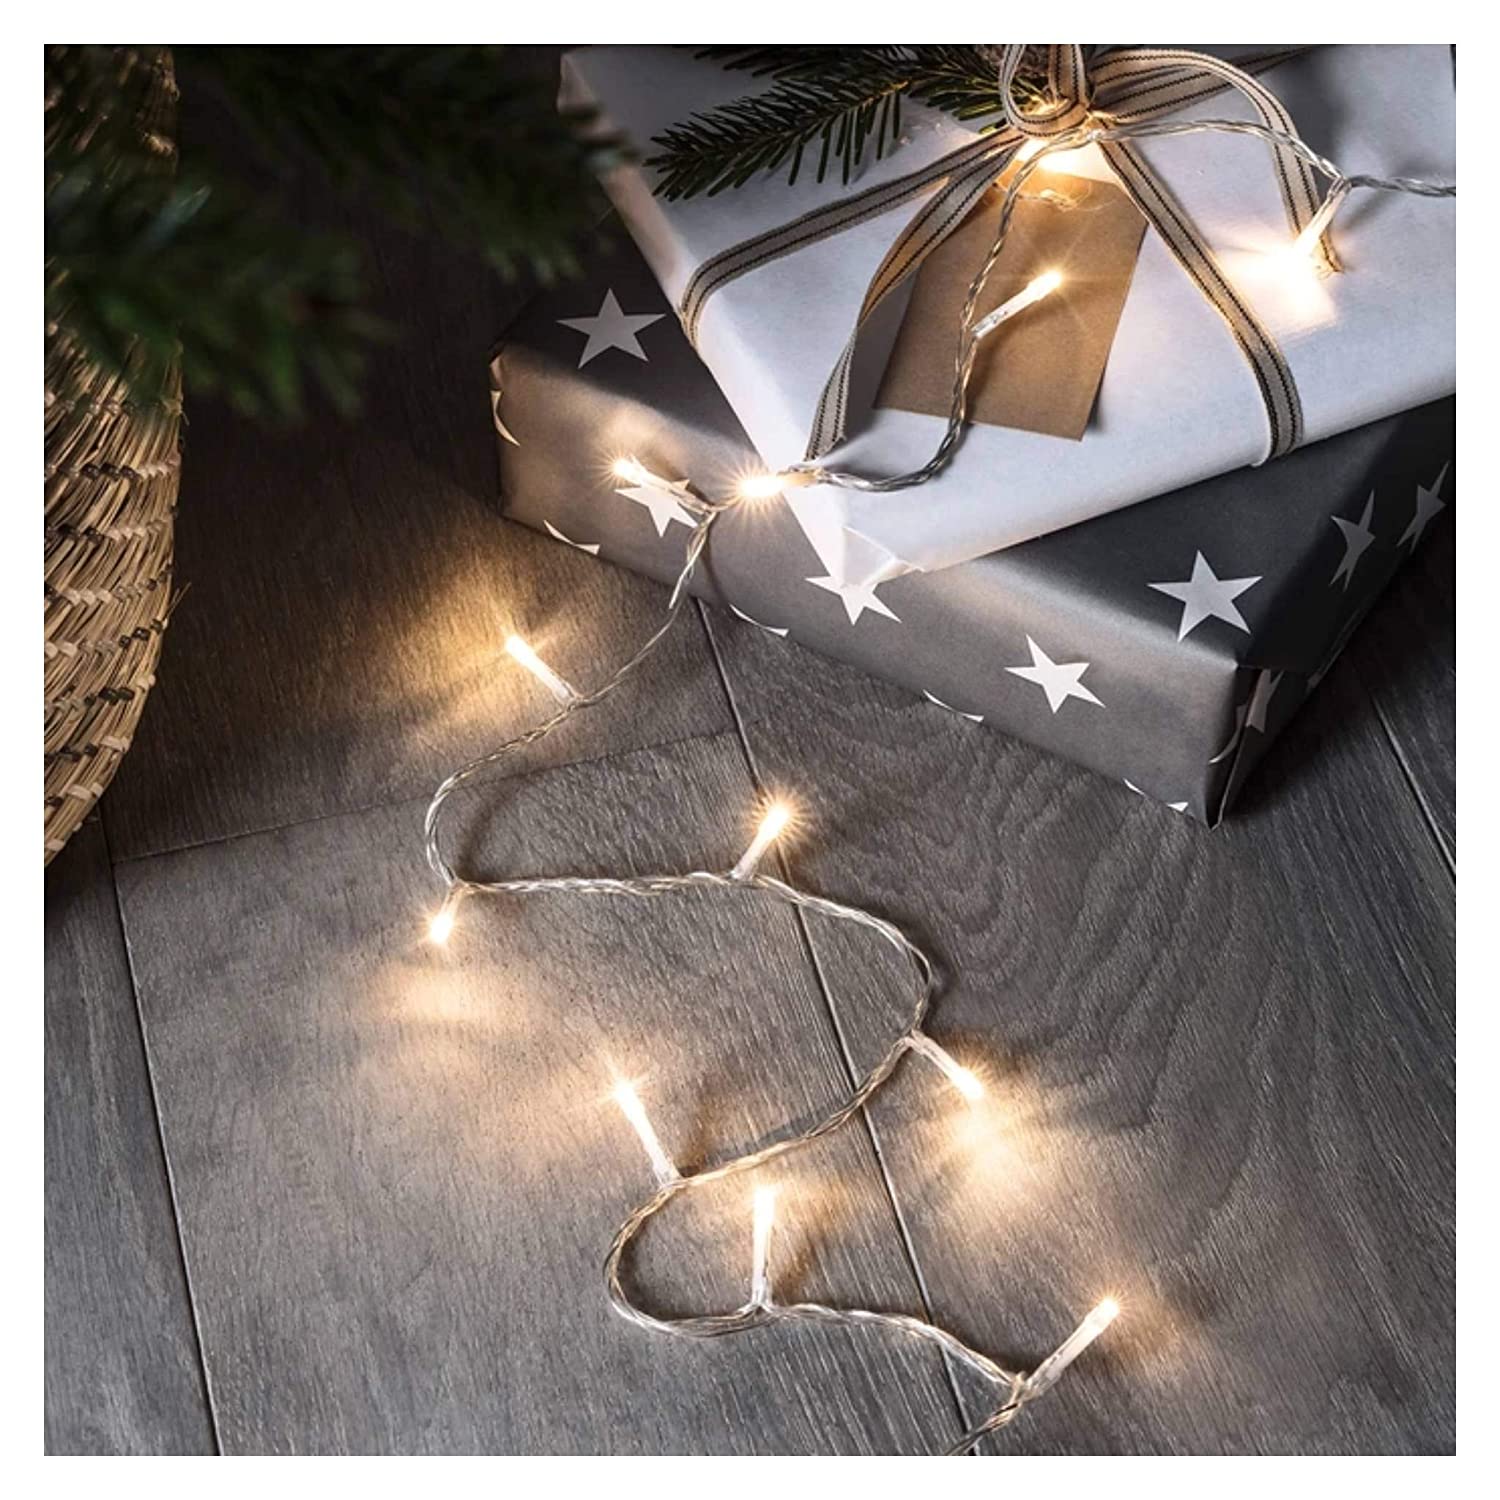 Glimmer Lightings home decoration bedroom 15 meter LED ladi string lights for Diwali Christmas Party balcony and weddings